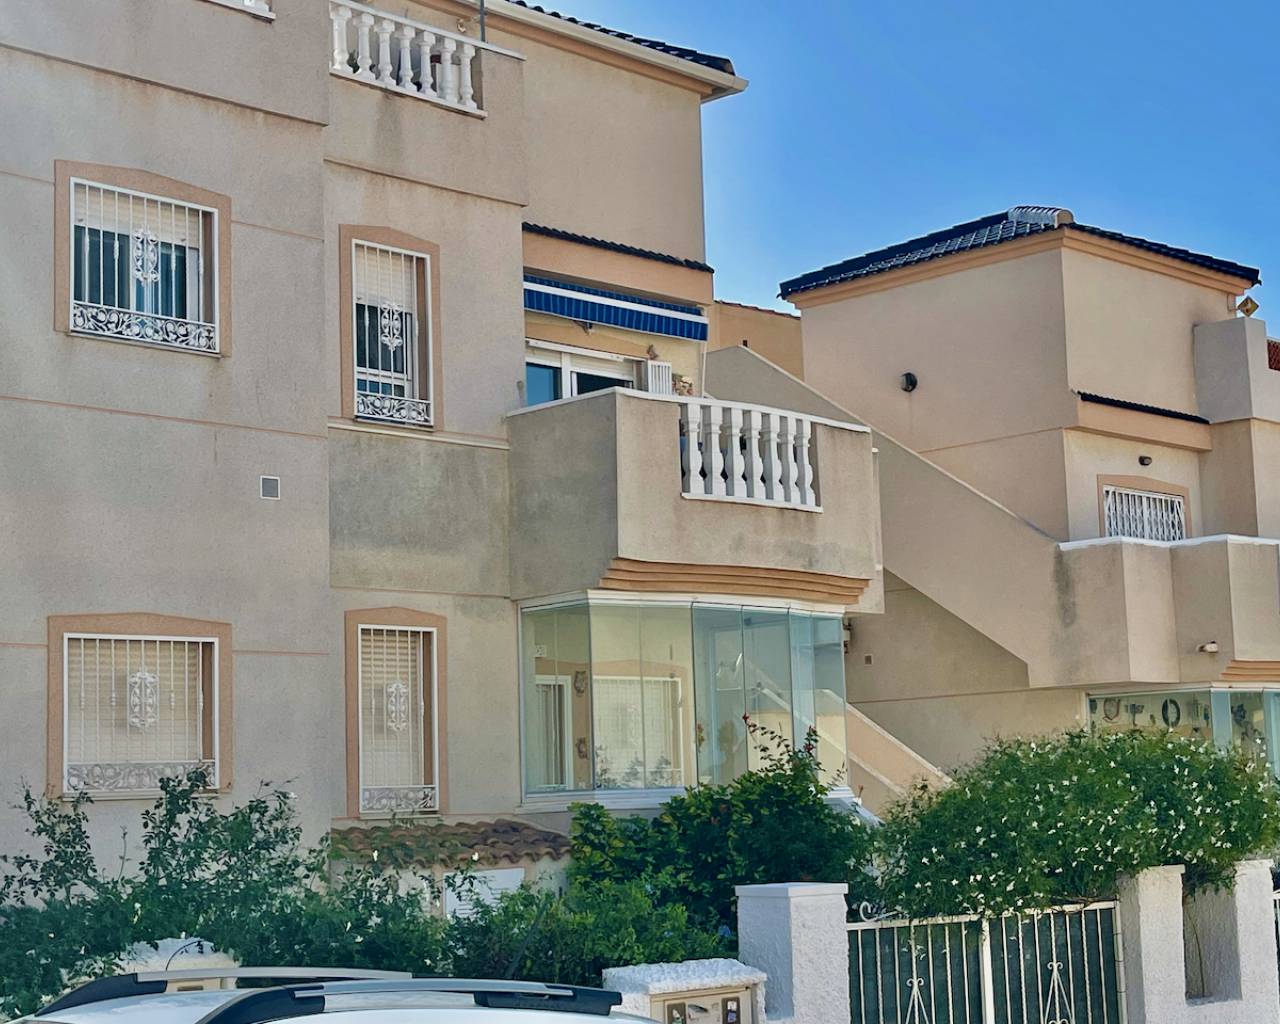 For sale: 2 bedroom apartment / flat in Rojales, Costa Blanca